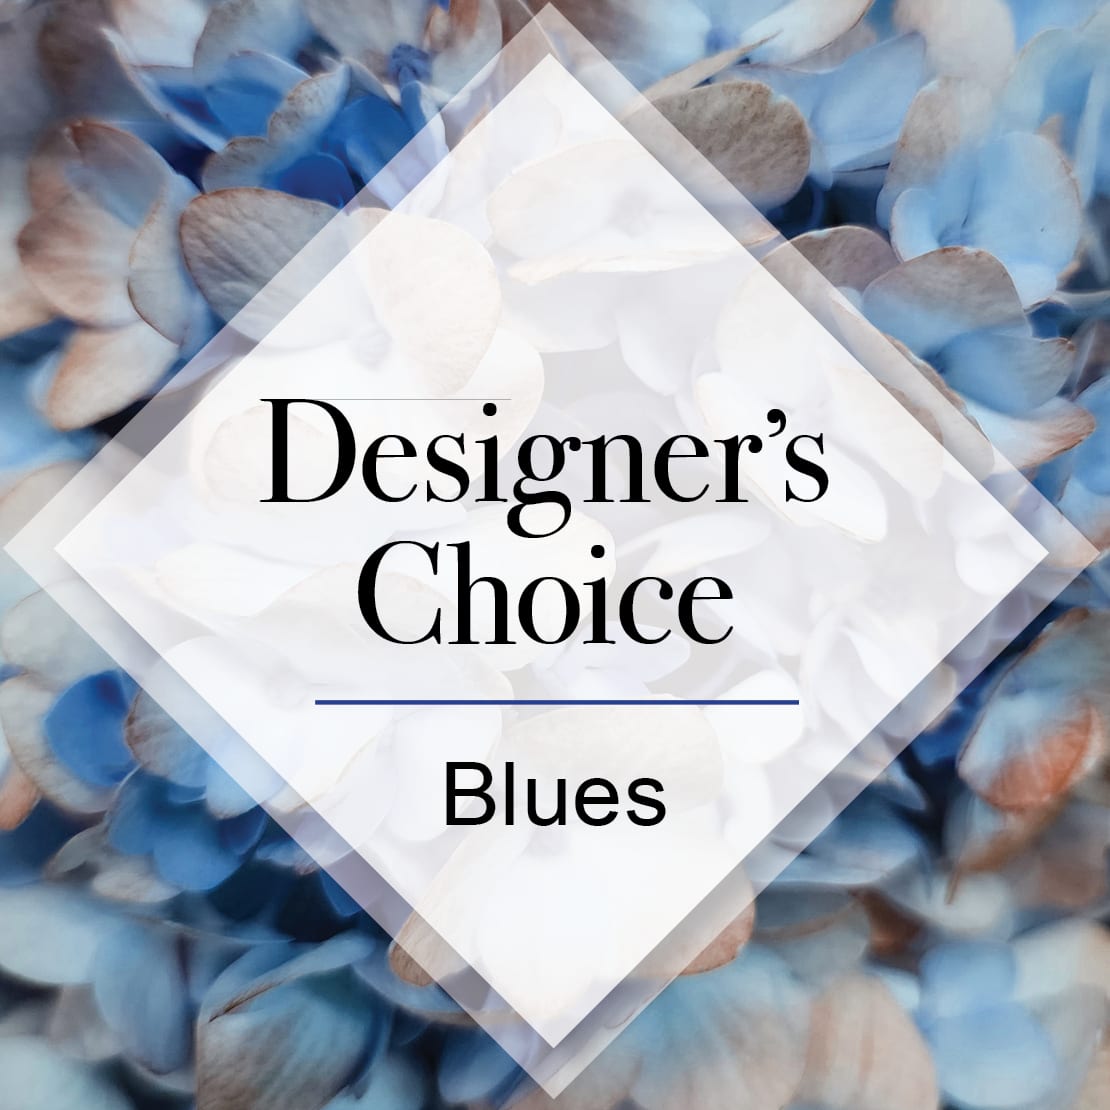 Designers Choice Blue - A selection that will be predominately the color that you have chosen with accents and greenery to compliment. The designers have the flexibility to create something unique and beautiful for you and is often the best value for you. If you have specifics you would like to request please include in the comments / special instructions area when placing your order.